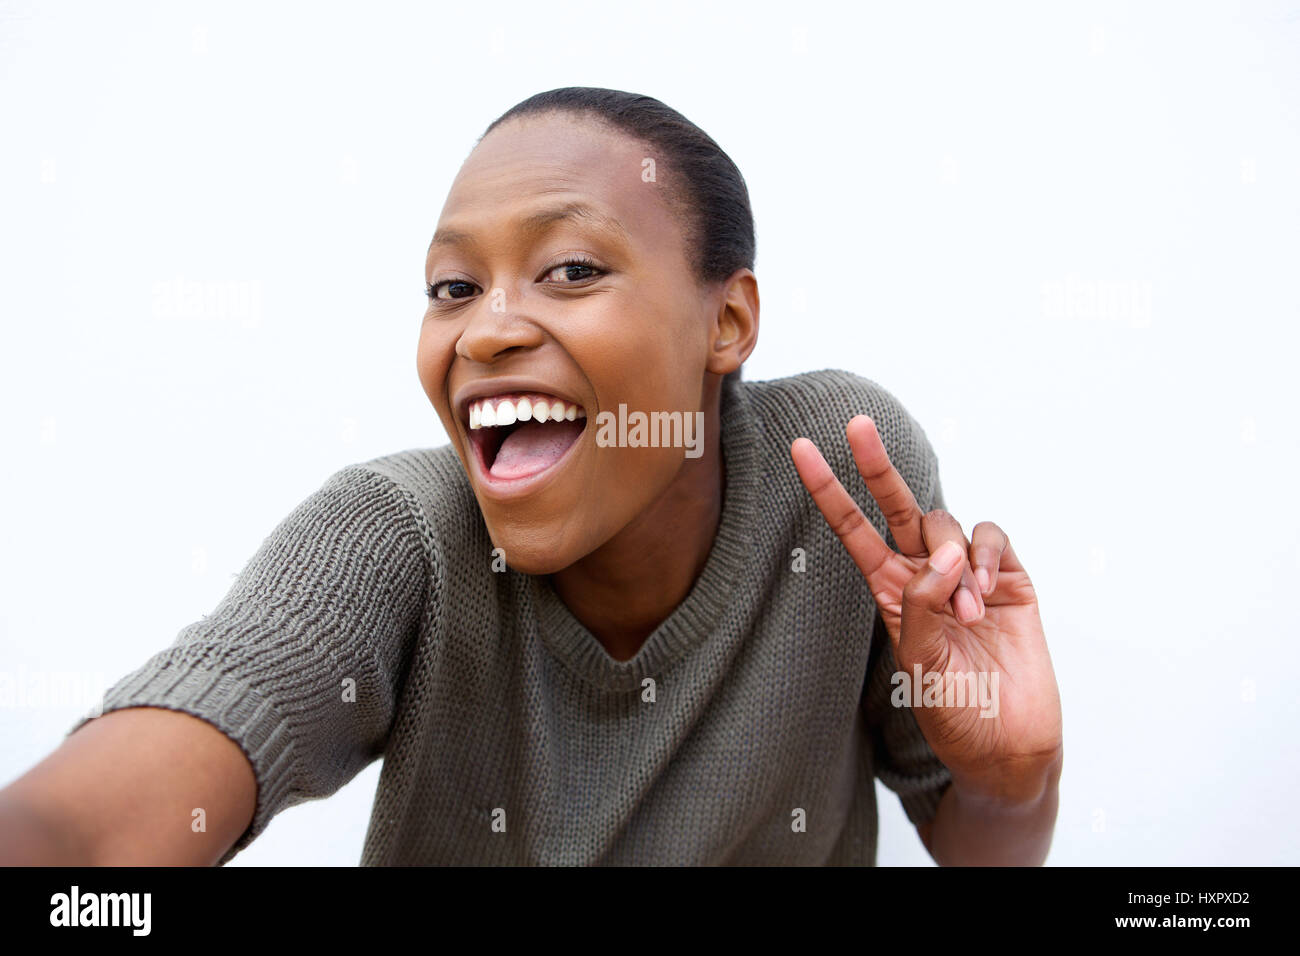 Portrait of smiling young African woman making peace sign against white background selfies Banque D'Images